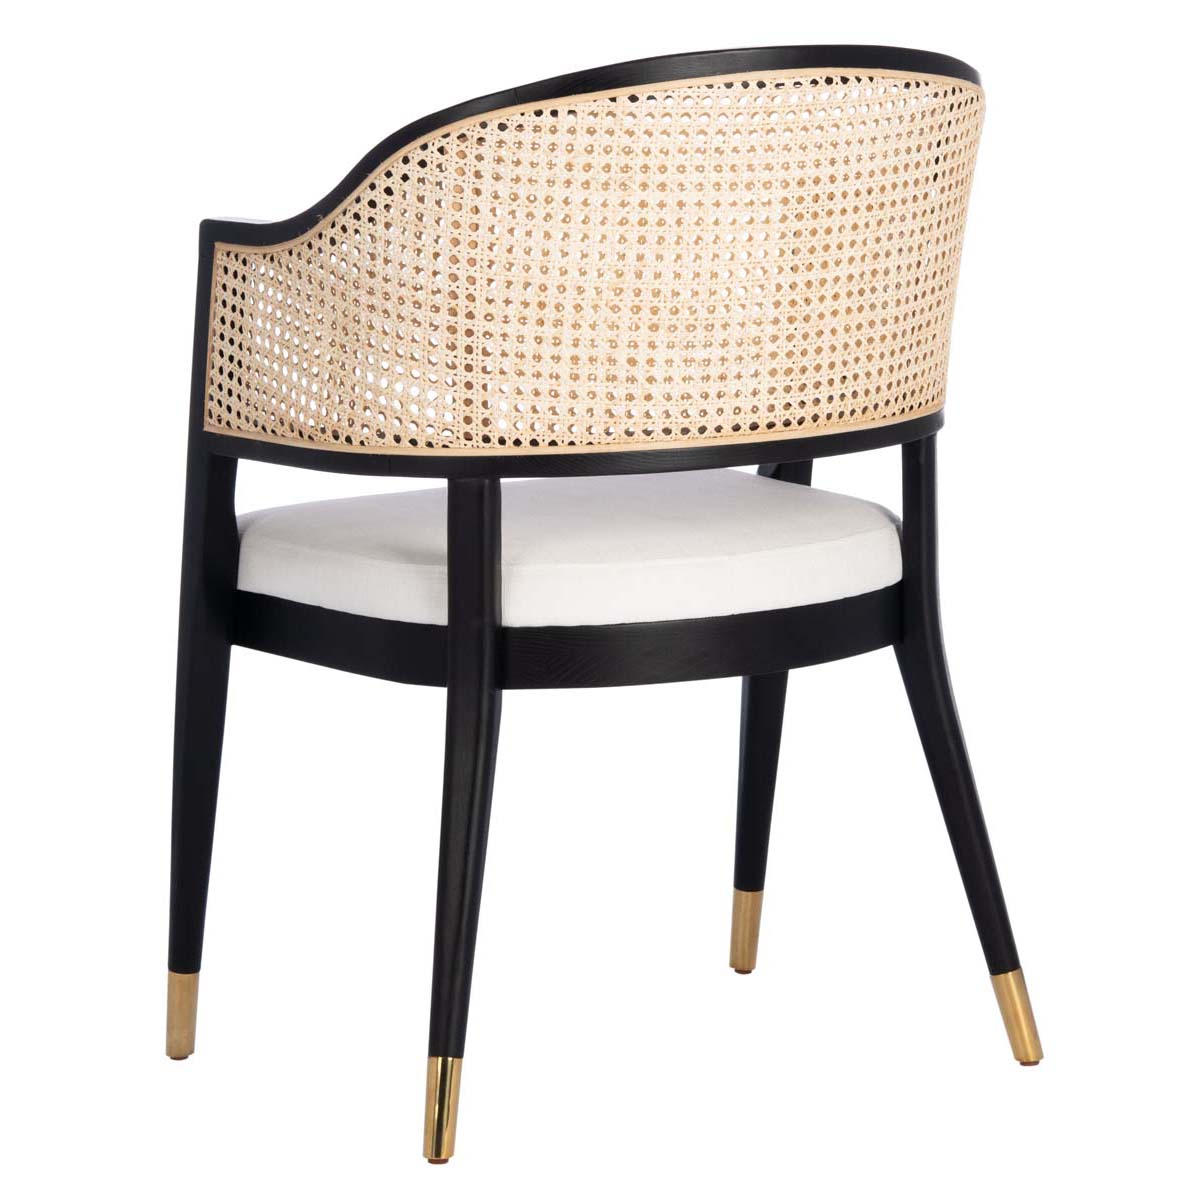 Safavieh Couture Rogue Rattan Dining Chair - Black / Natural